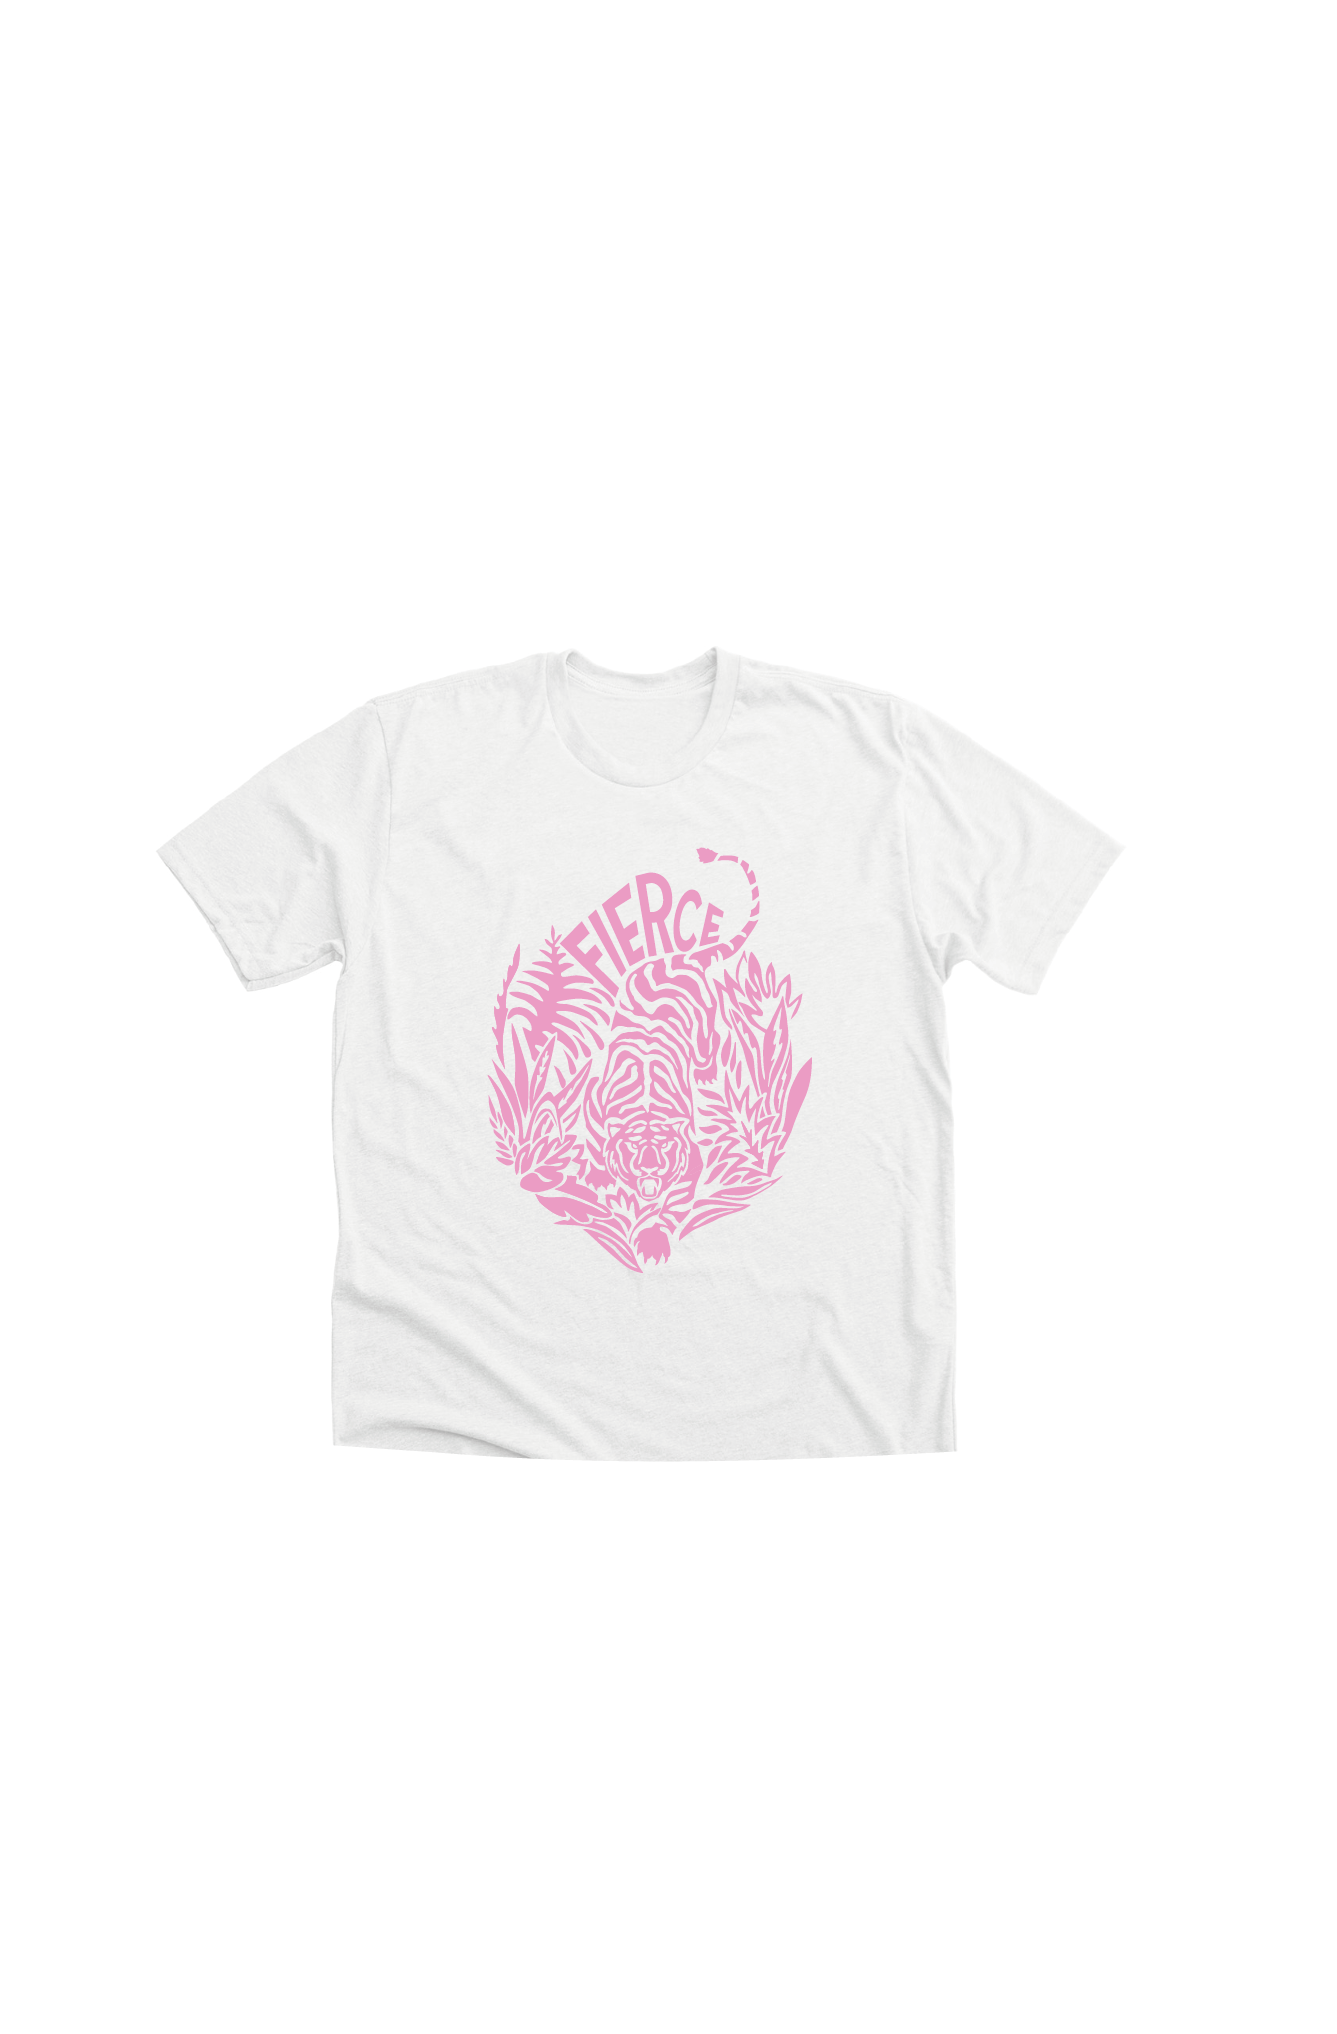 Ladies white crop top with a light pink print of a tiger on the front